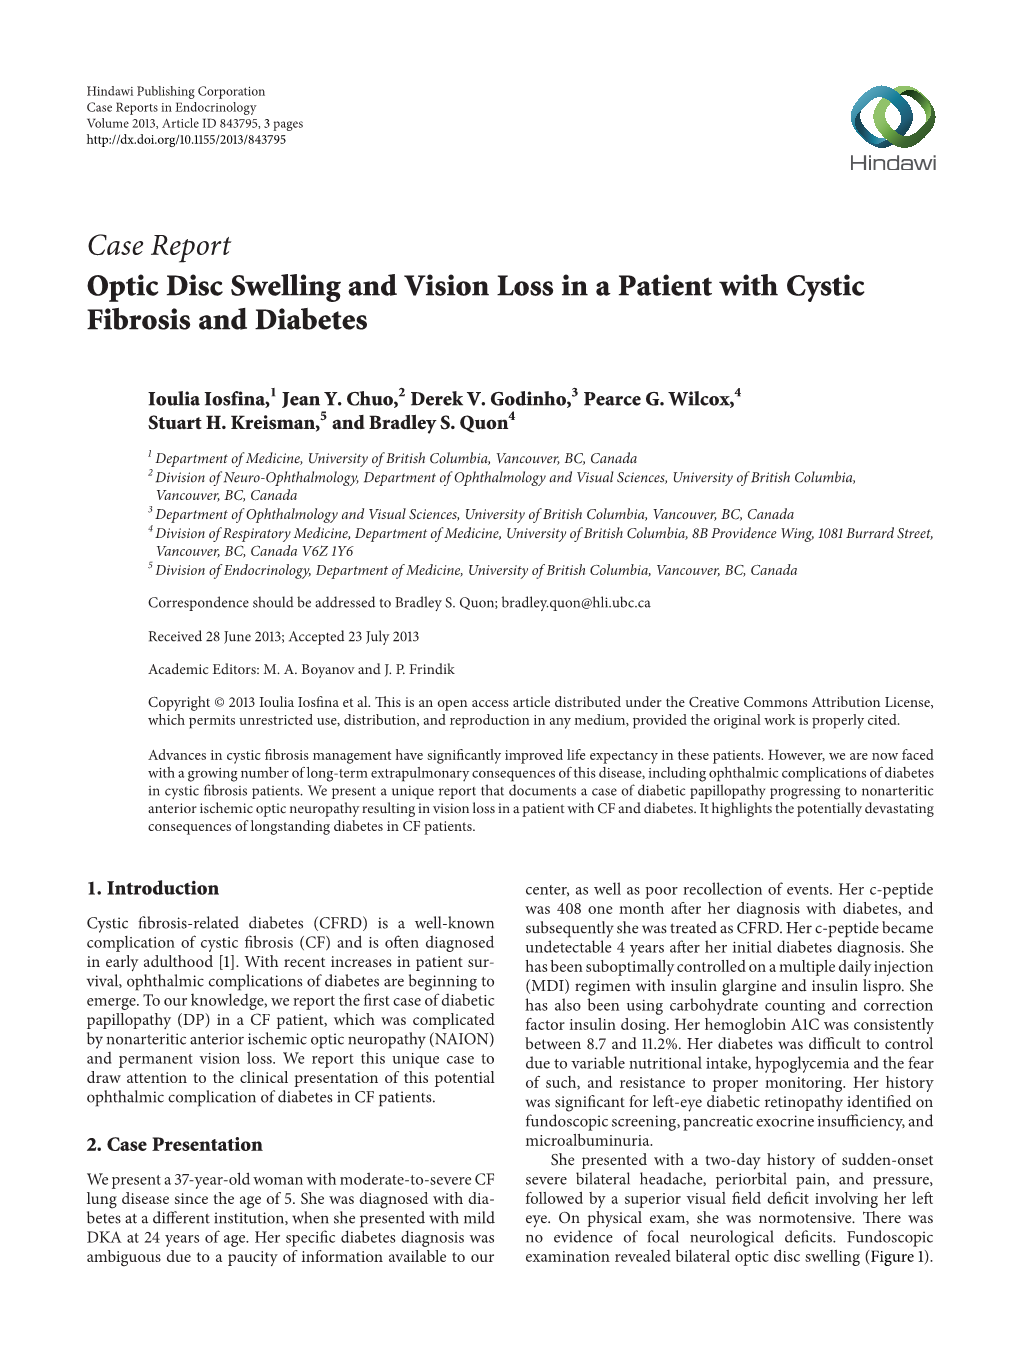 Optic Disc Swelling and Vision Loss in a Patient with Cystic Fibrosis and Diabetes